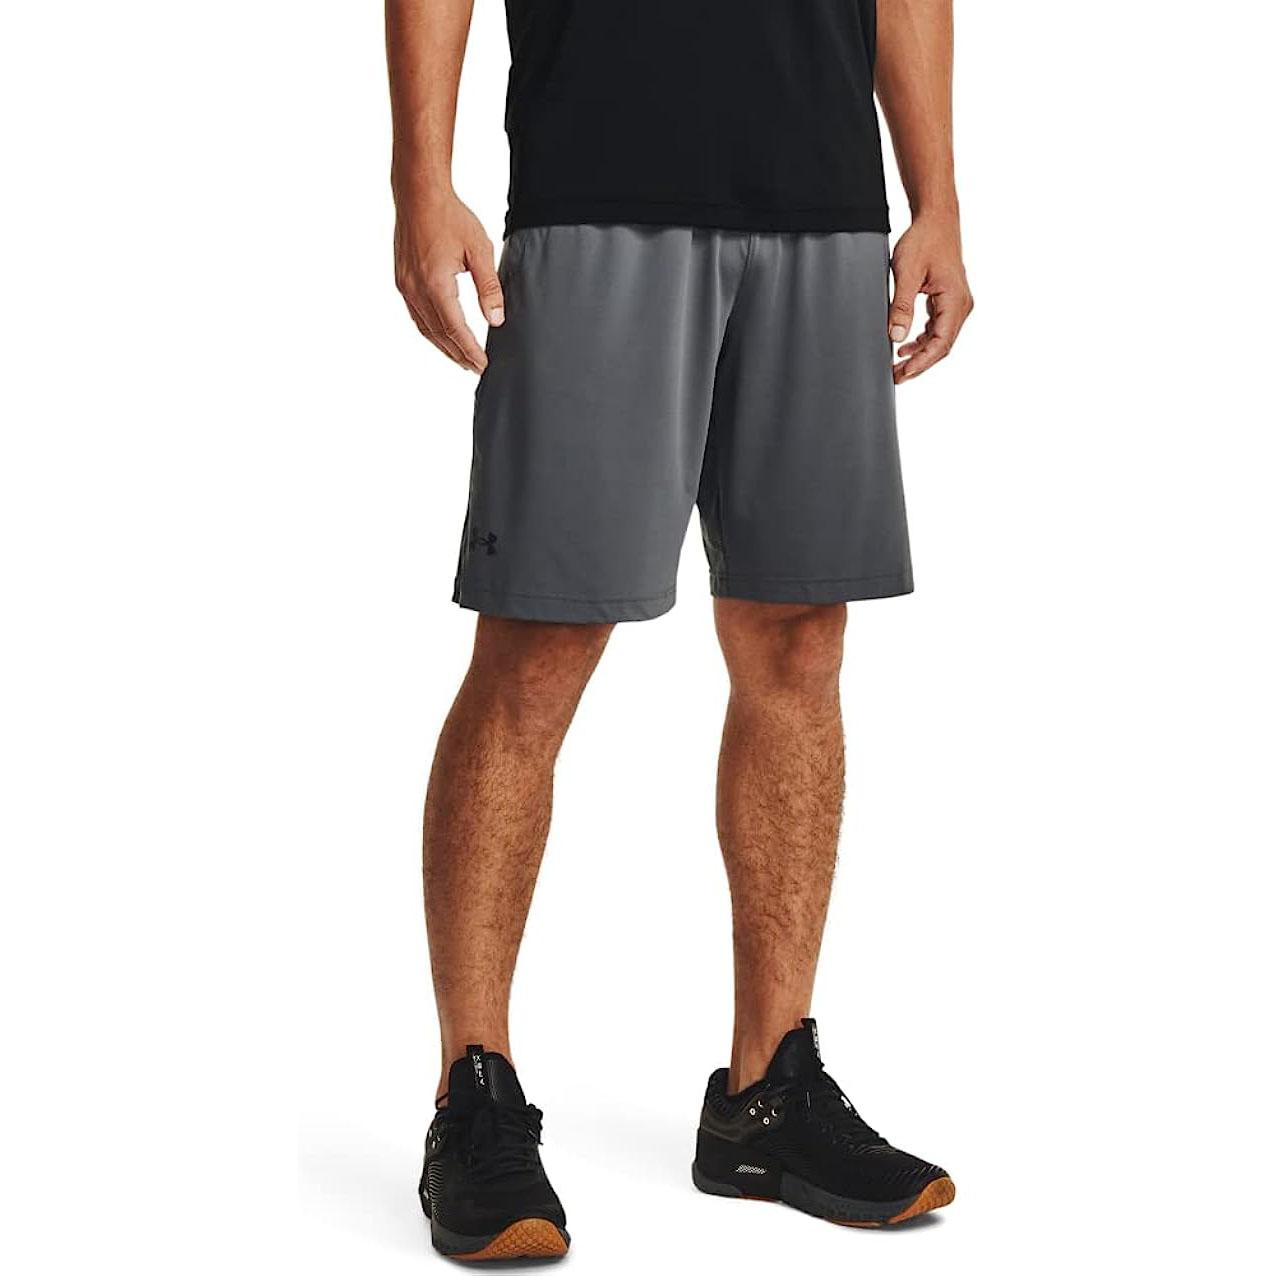 Under Armour Mens Raid 2.0 Gym Shorts Pitch Gray for $13.18